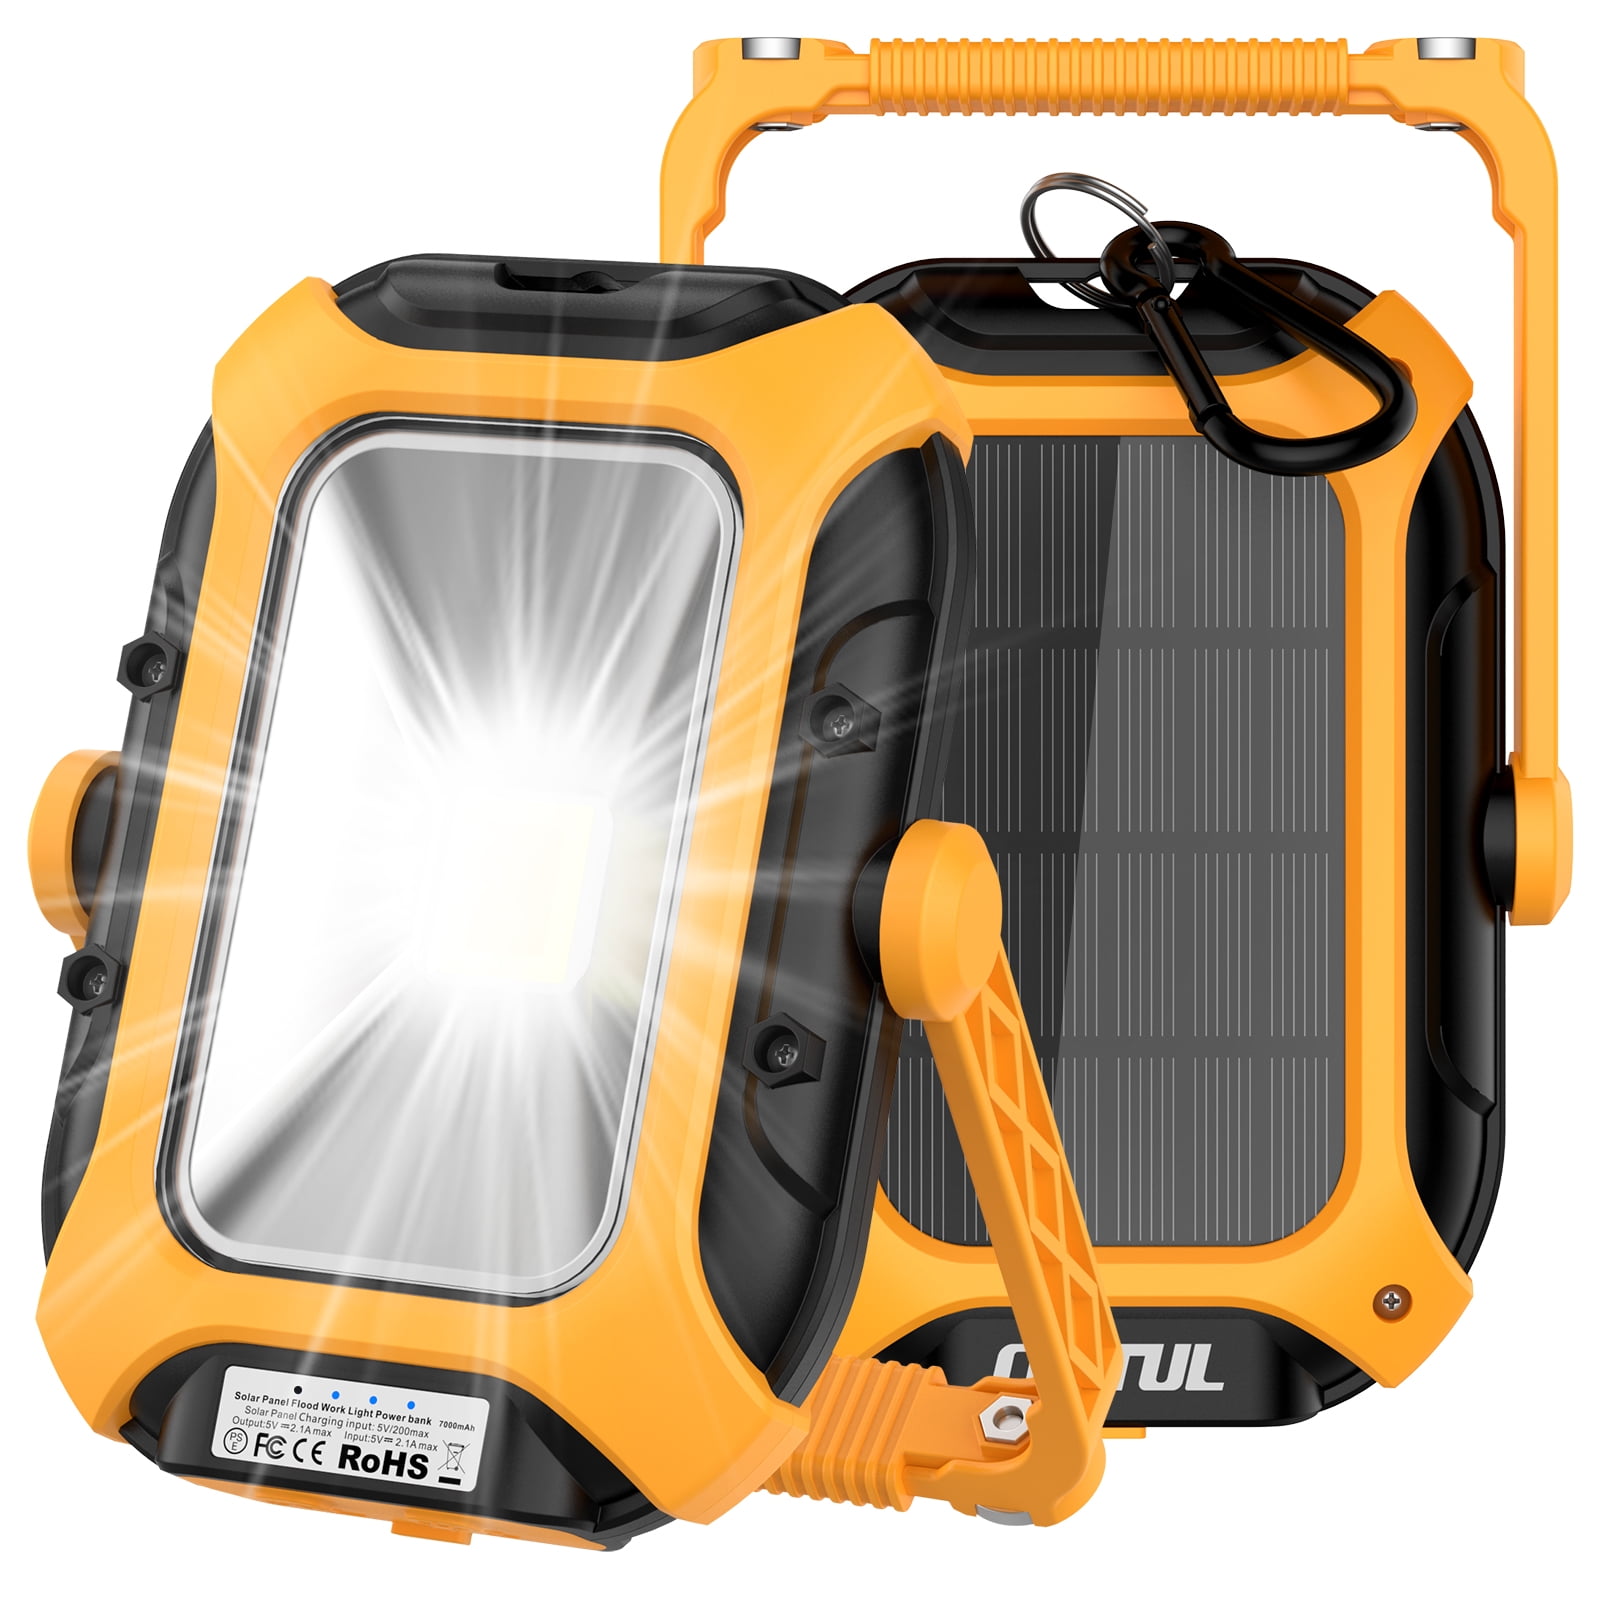 USB Rechargeable LED Work Light Folding Flood Light Camping Stand Working Lamps 